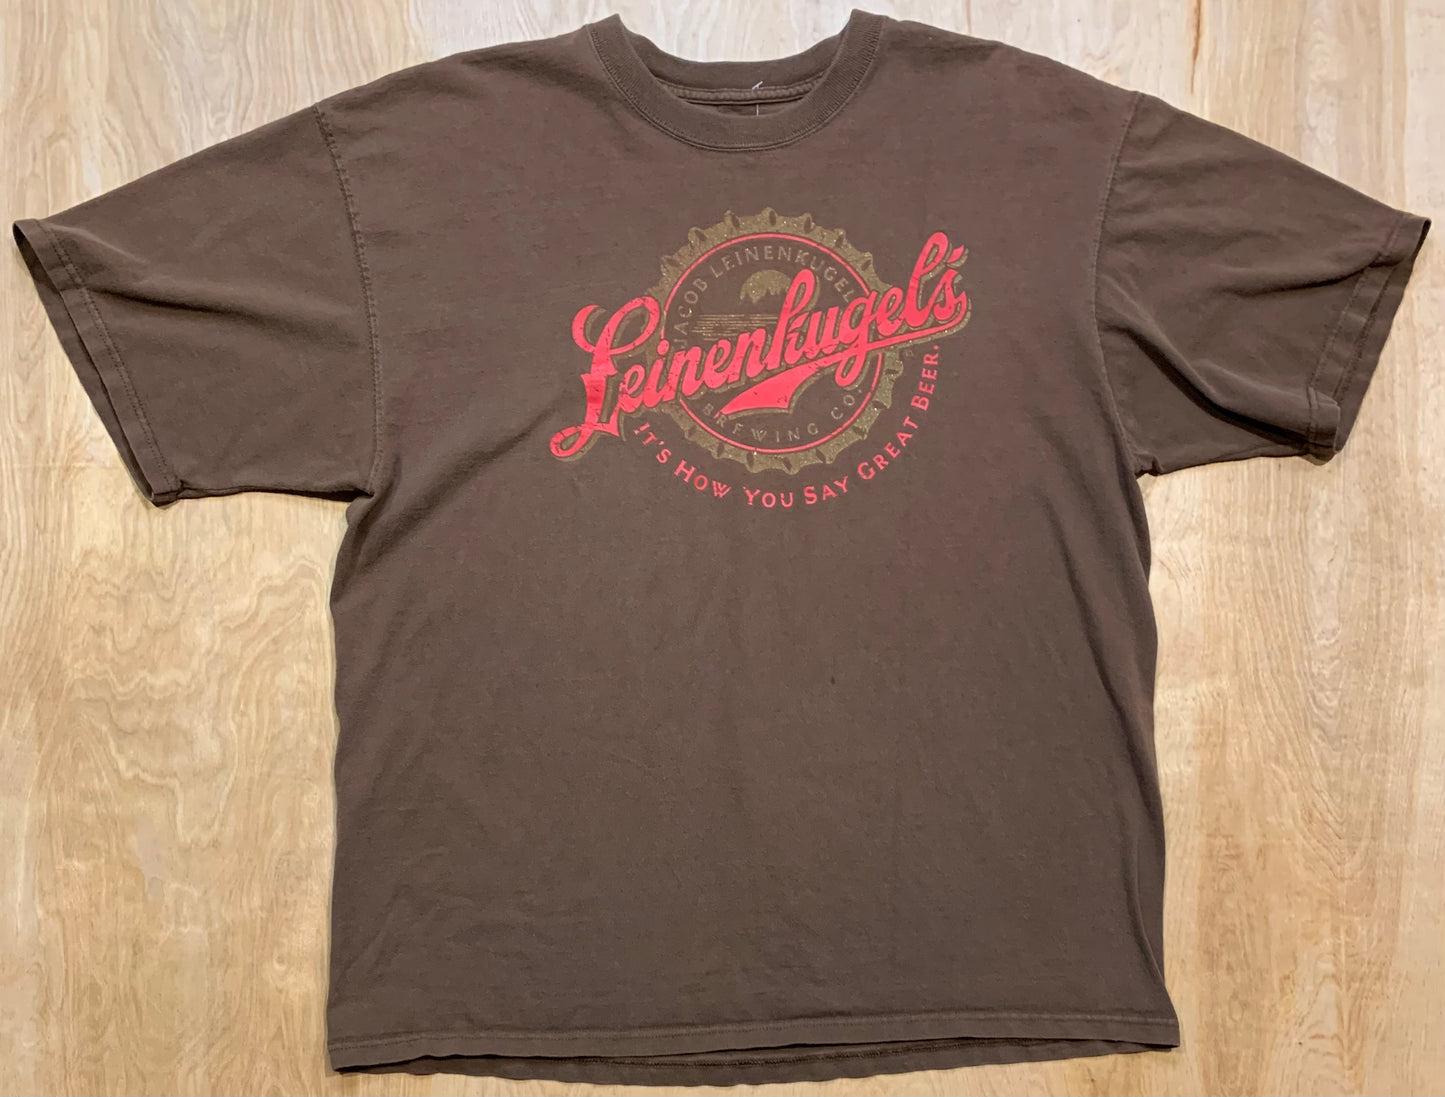 Leinenkugels "It's How You Say Great Beer" T-Shirt